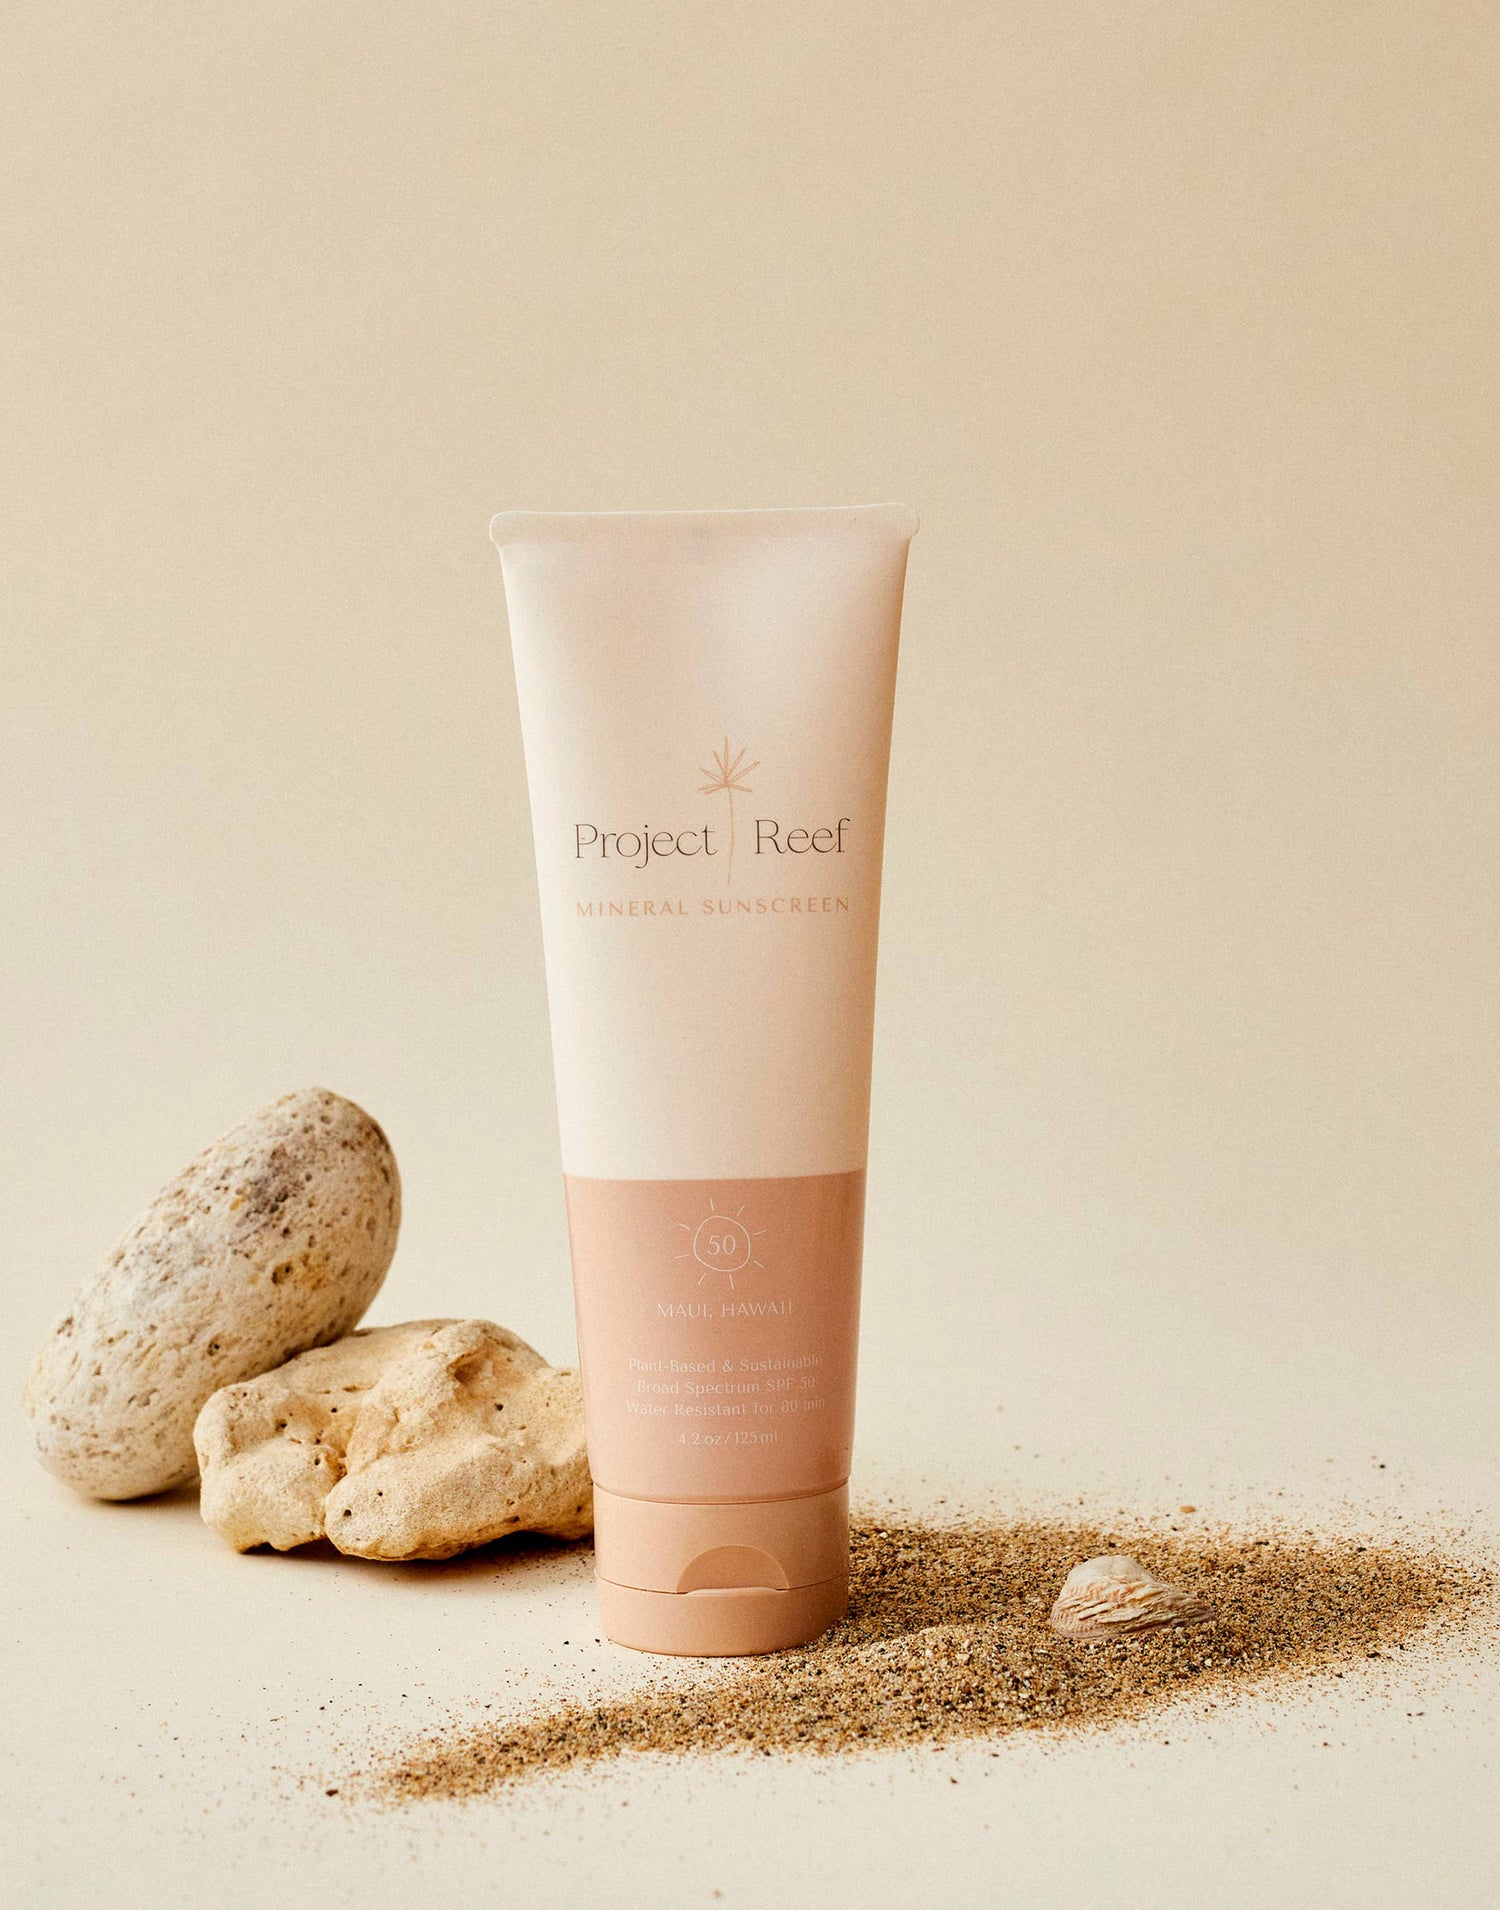 Mineral Sunscreen SPF 50 Natural, Vegan, Reef Safe Suncare by Project Reef - Product View